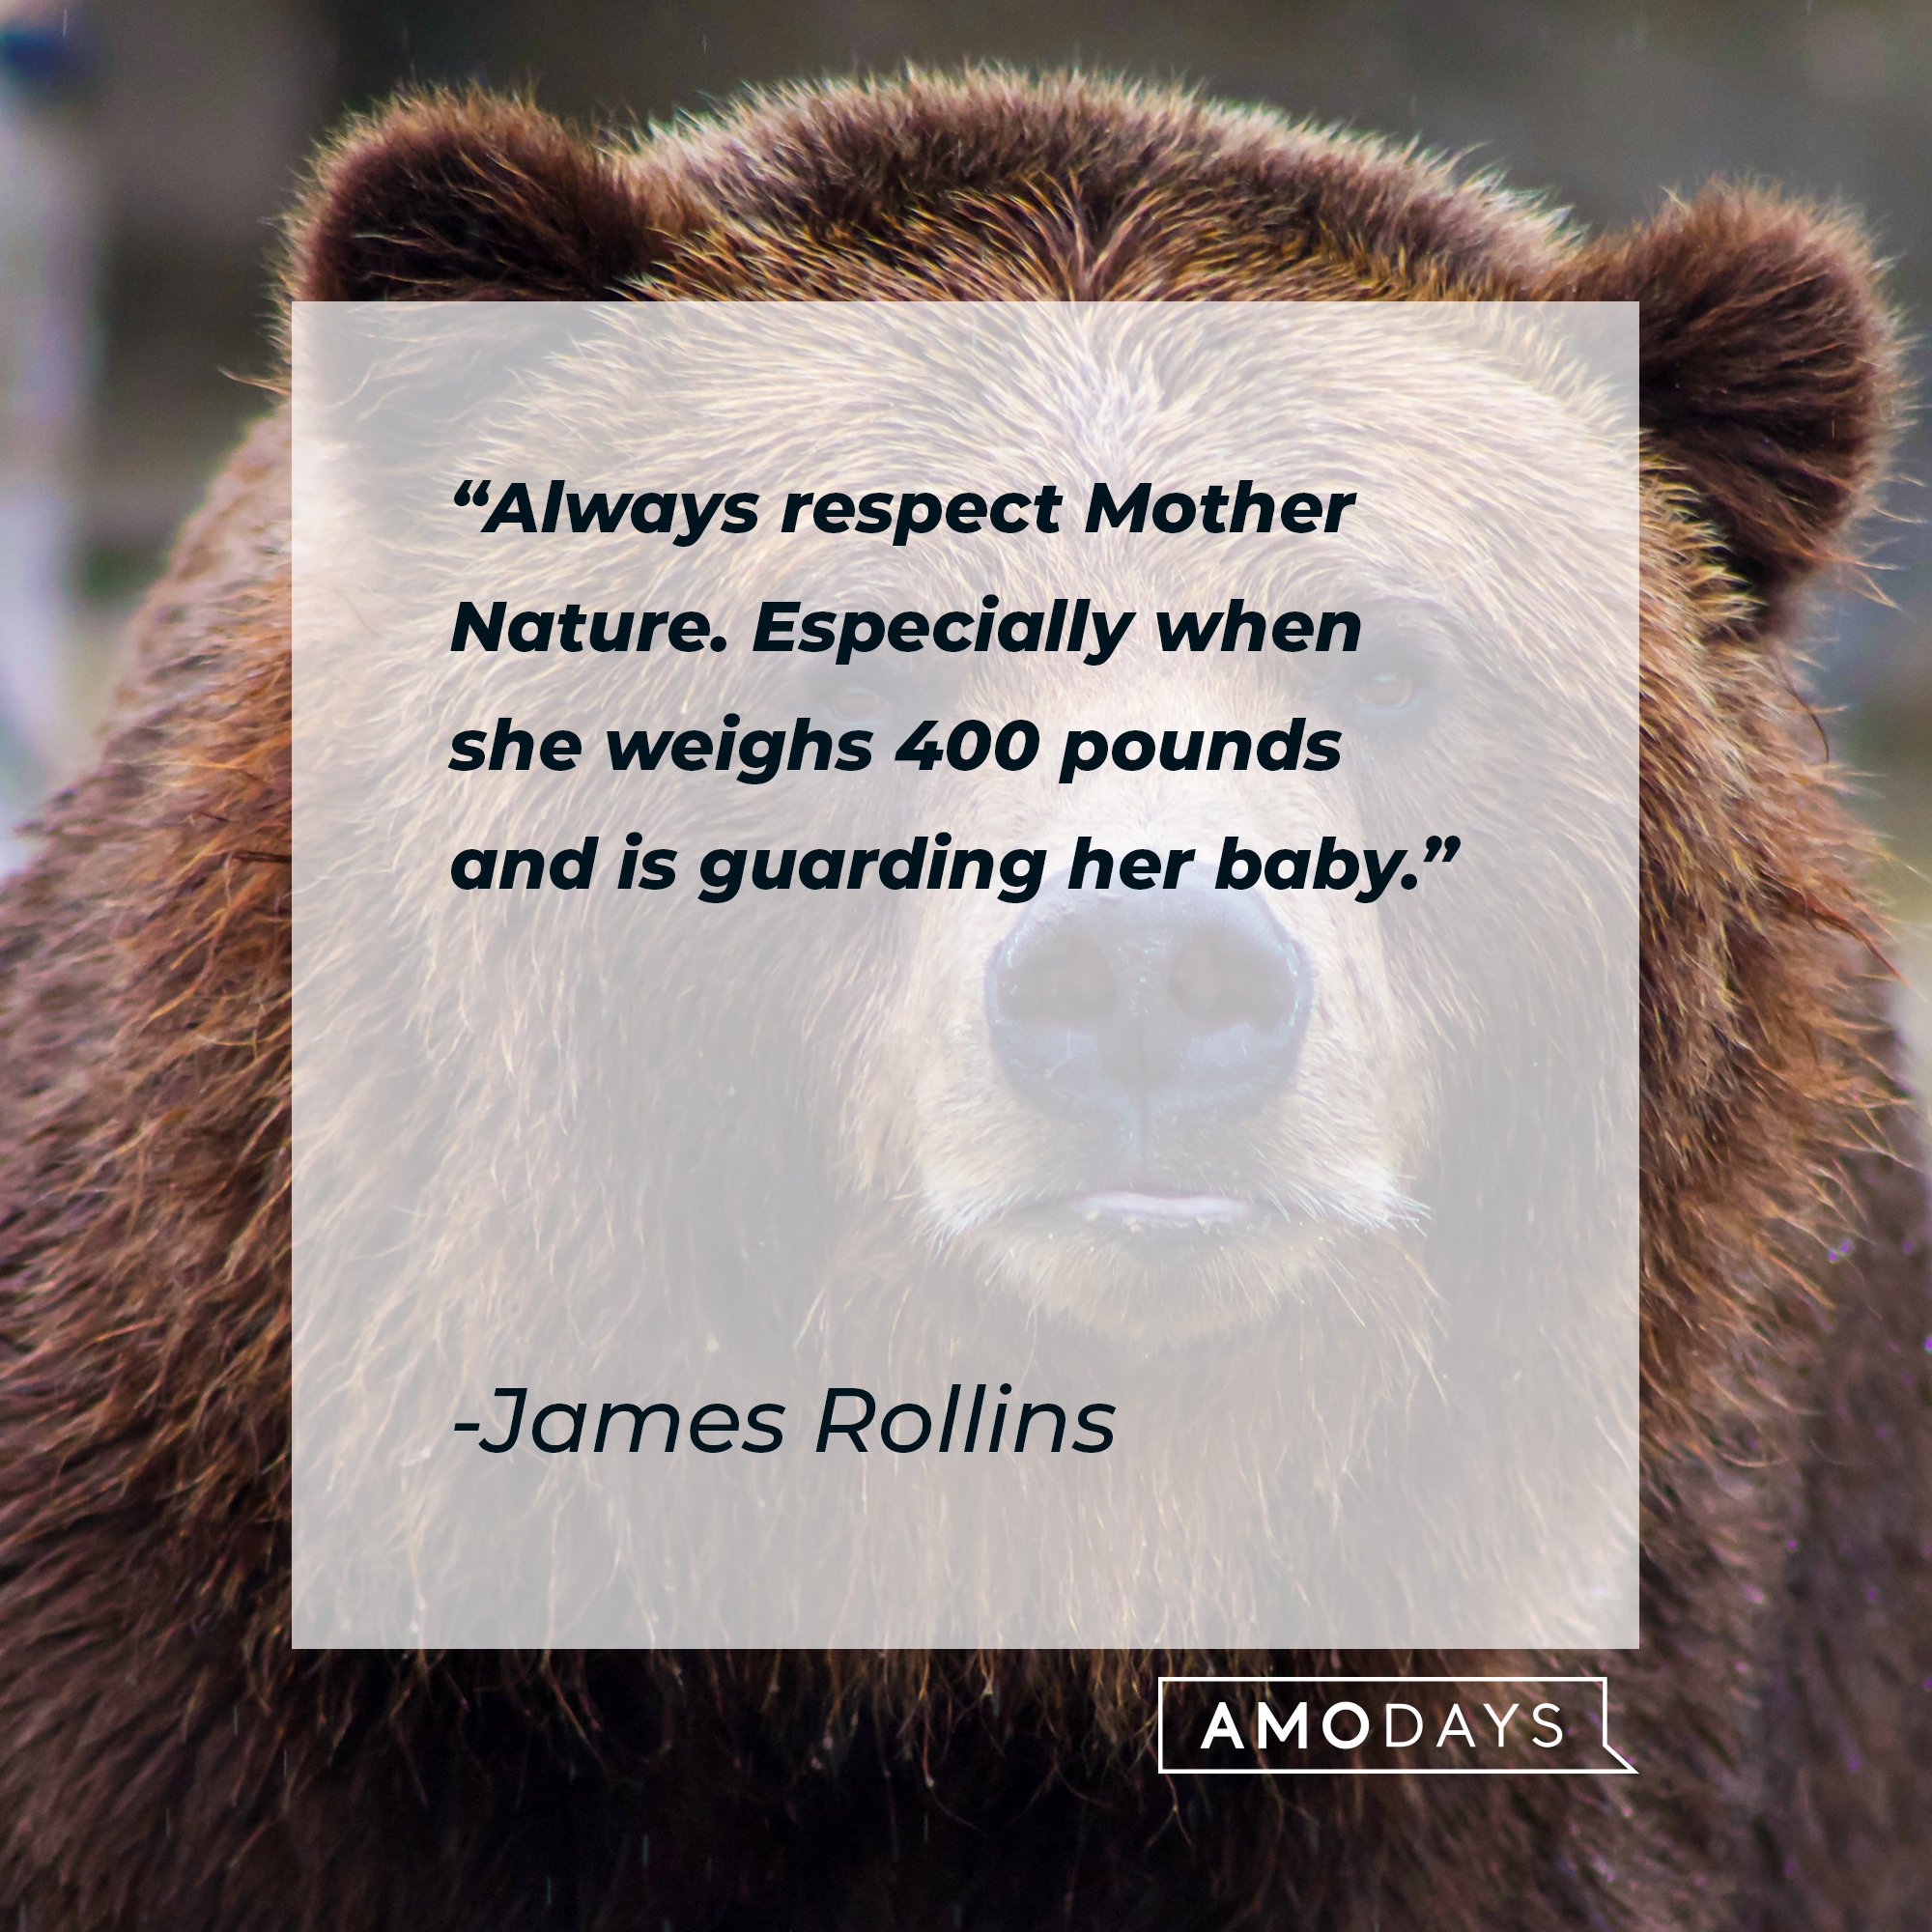 James Rollins’ quote: "Always respect Mother Nature. Especially when she weighs 400 pounds and is guarding her baby." | Image: AmoDays